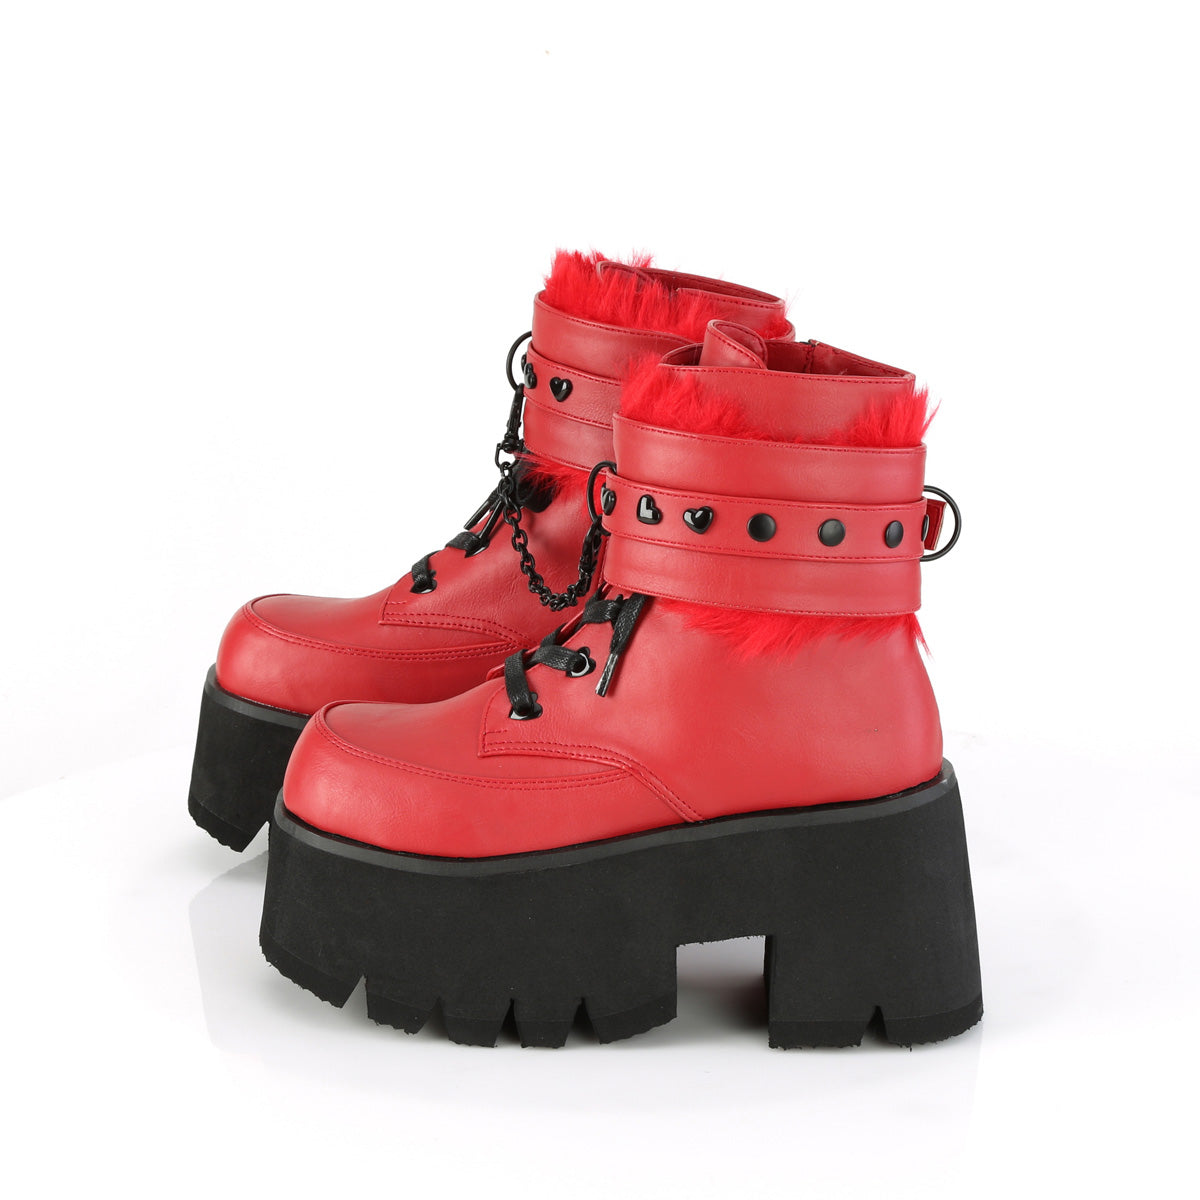 ASHES-57 Demonia Red Vegan Leather Women's Ankle Boots [Alternative Footwear]